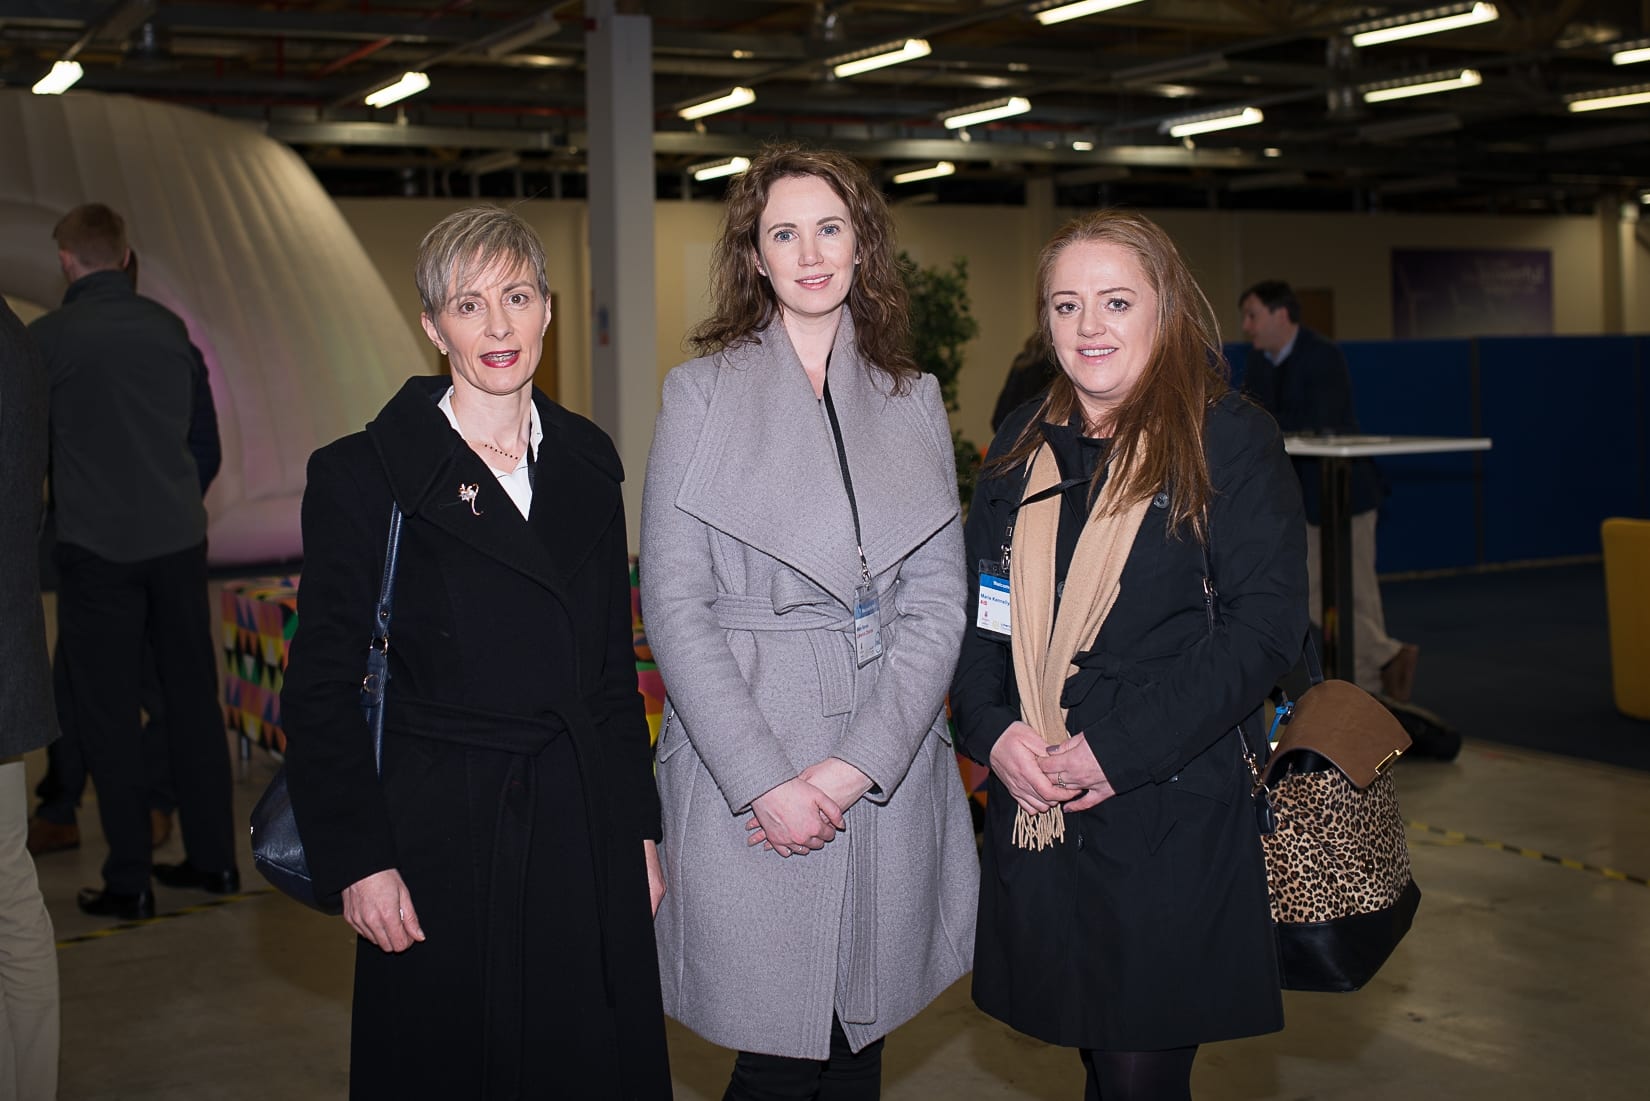 At the Limerick Chamber Regional Leaders programme in Dell, sponsored by Dell EMC, in association with Kemmy Business School UL, was From left to right: Elizabeth Leo - RRD Supply Chain, Mary McNamee - Limerick Chamber, Marie Kennelly- AIB